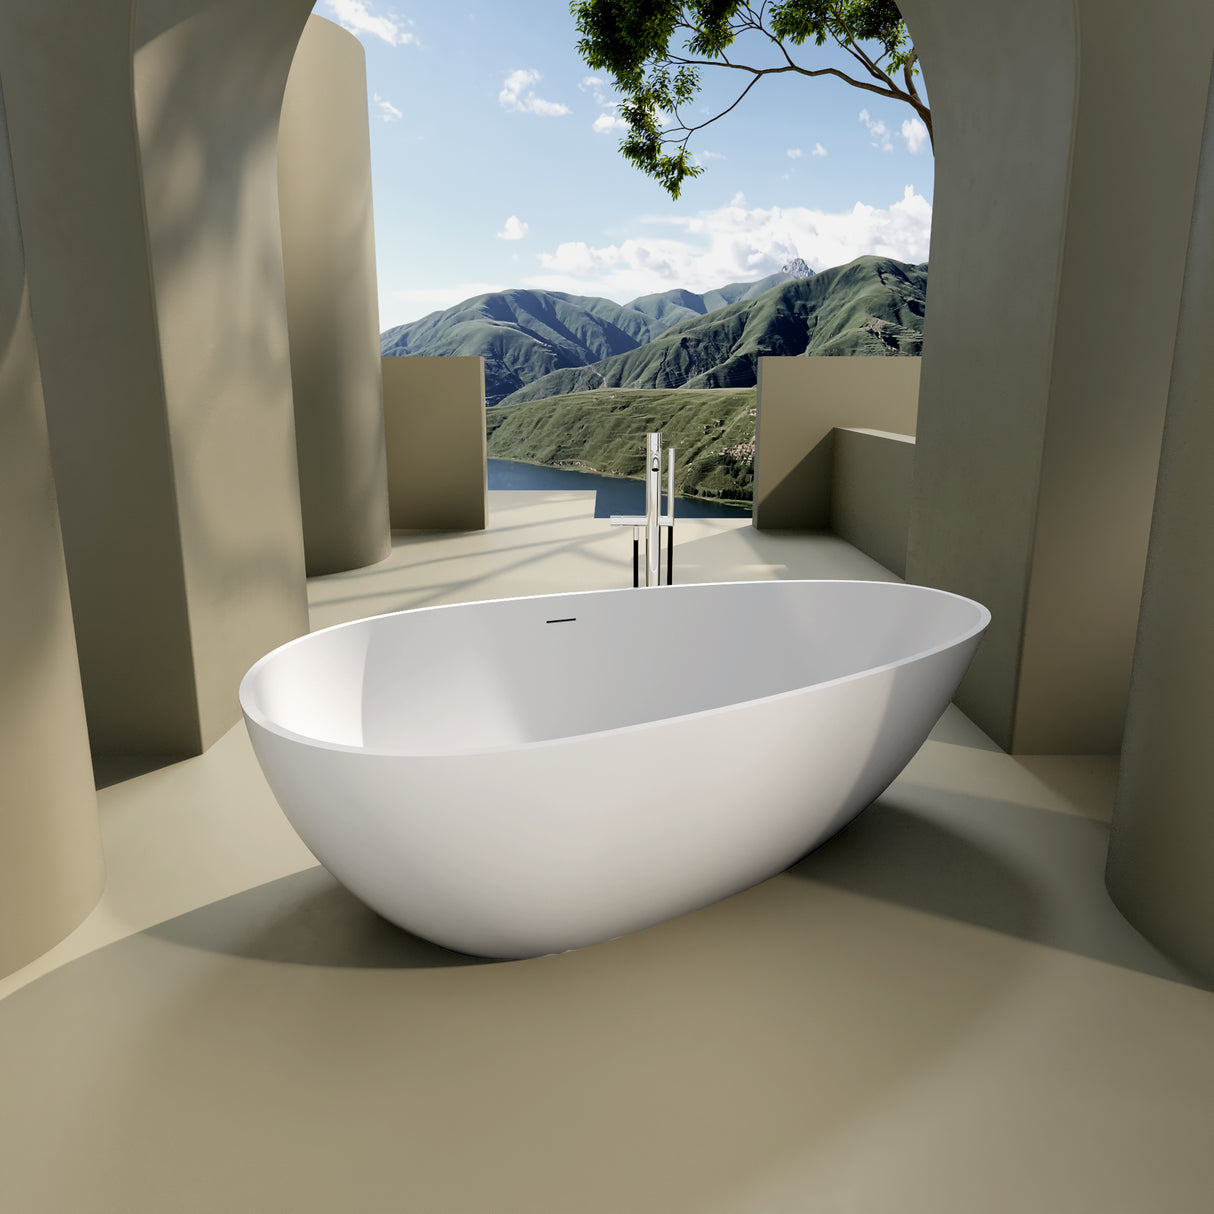 Modern Design Matte White Solid Surface Freestanding Soaking Bathtub with Overflow, cUPC Certified - 59*31 22S02-59